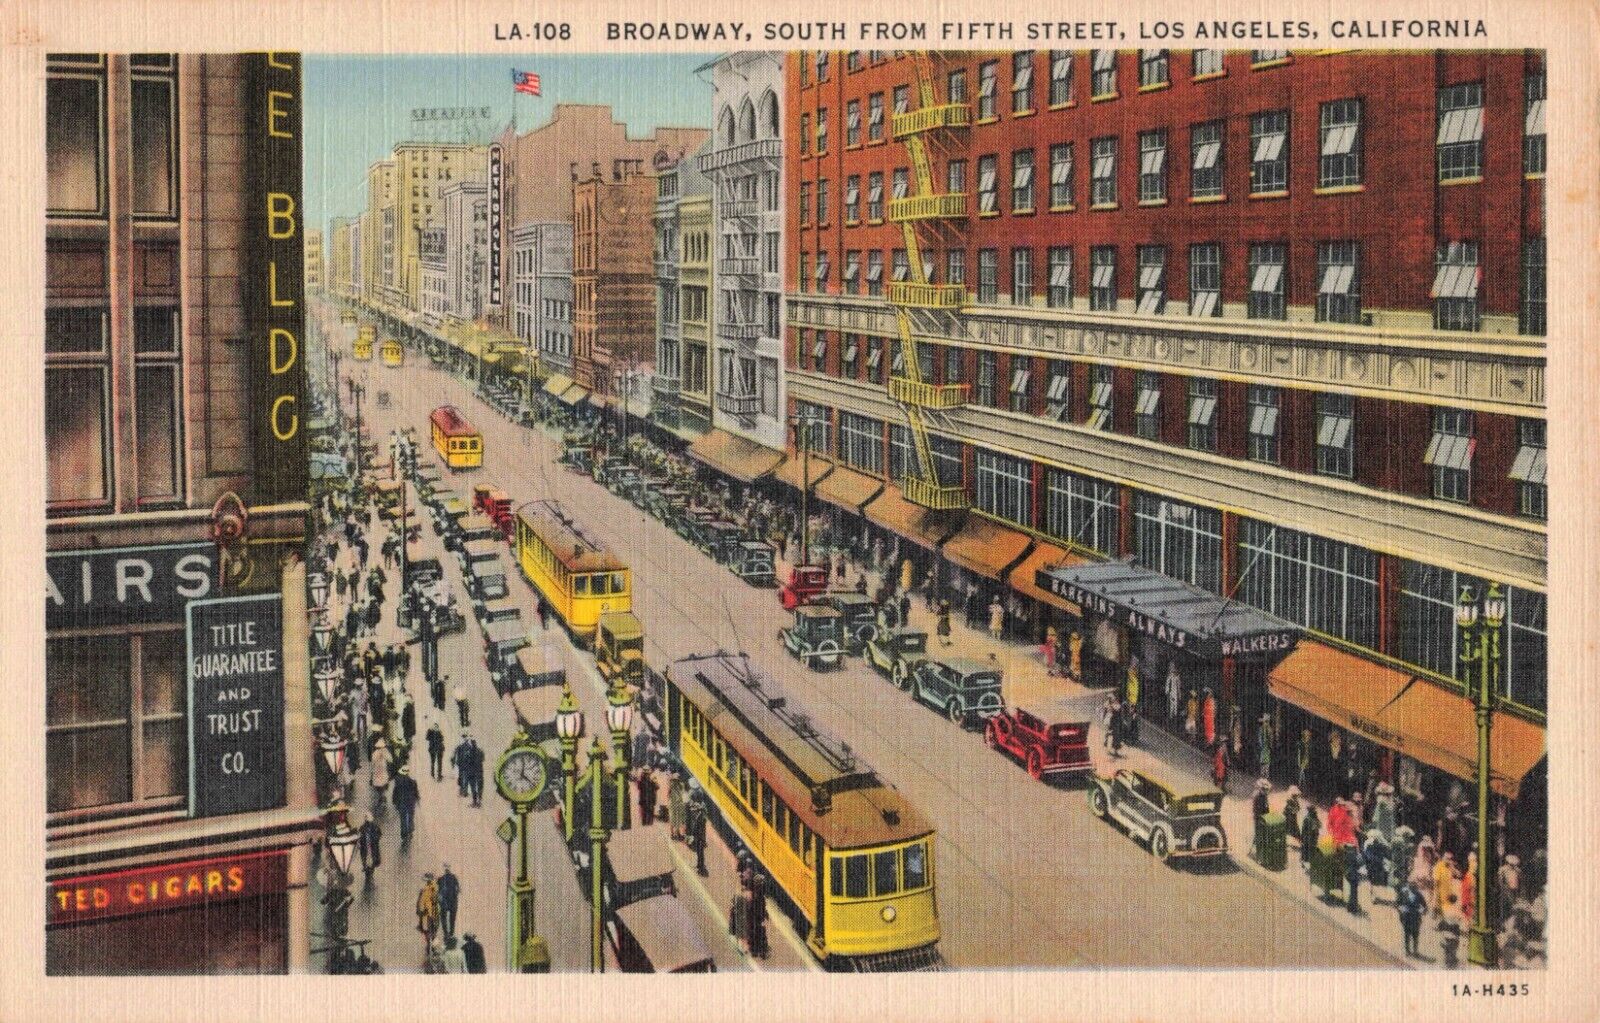 Los Angeles CA Broadway South from Fifth Street c.1930's Postcard A519